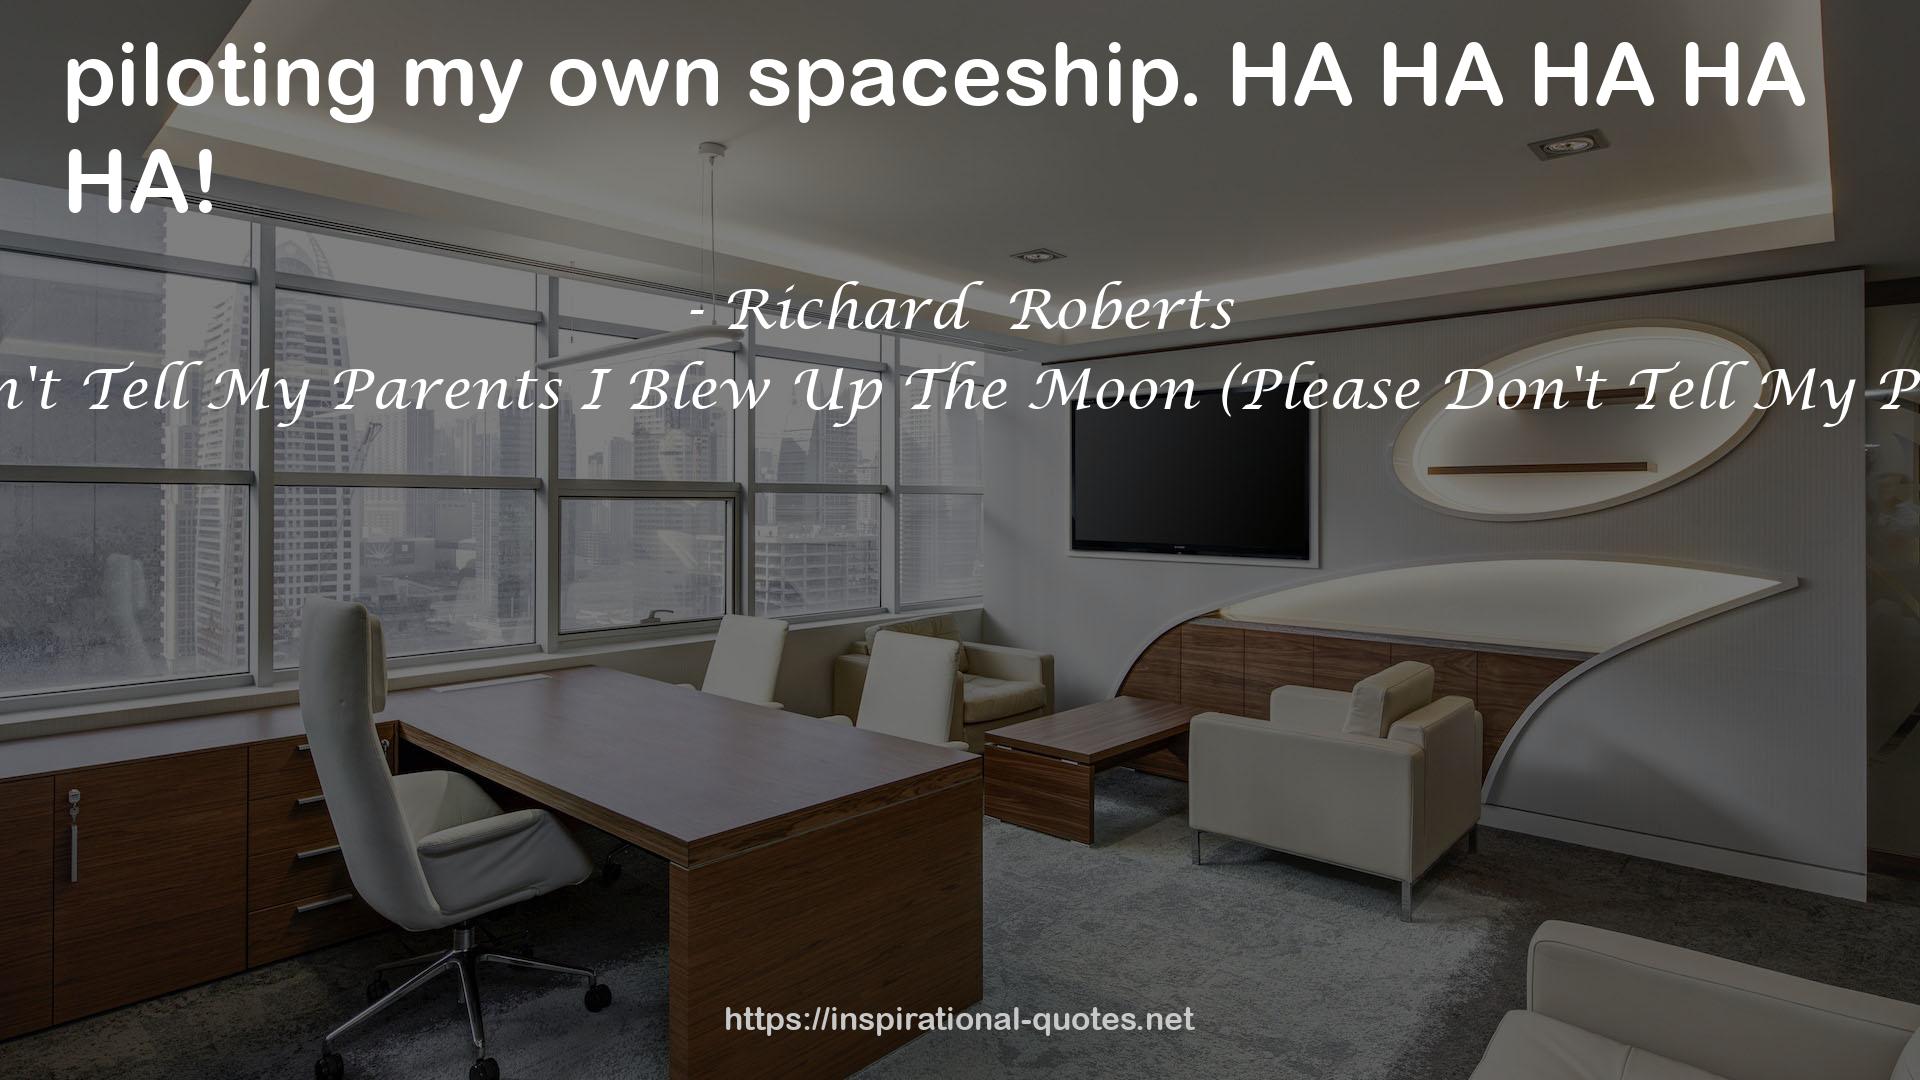 Please Don't Tell My Parents I Blew Up The Moon (Please Don't Tell My Parents, #2) QUOTES